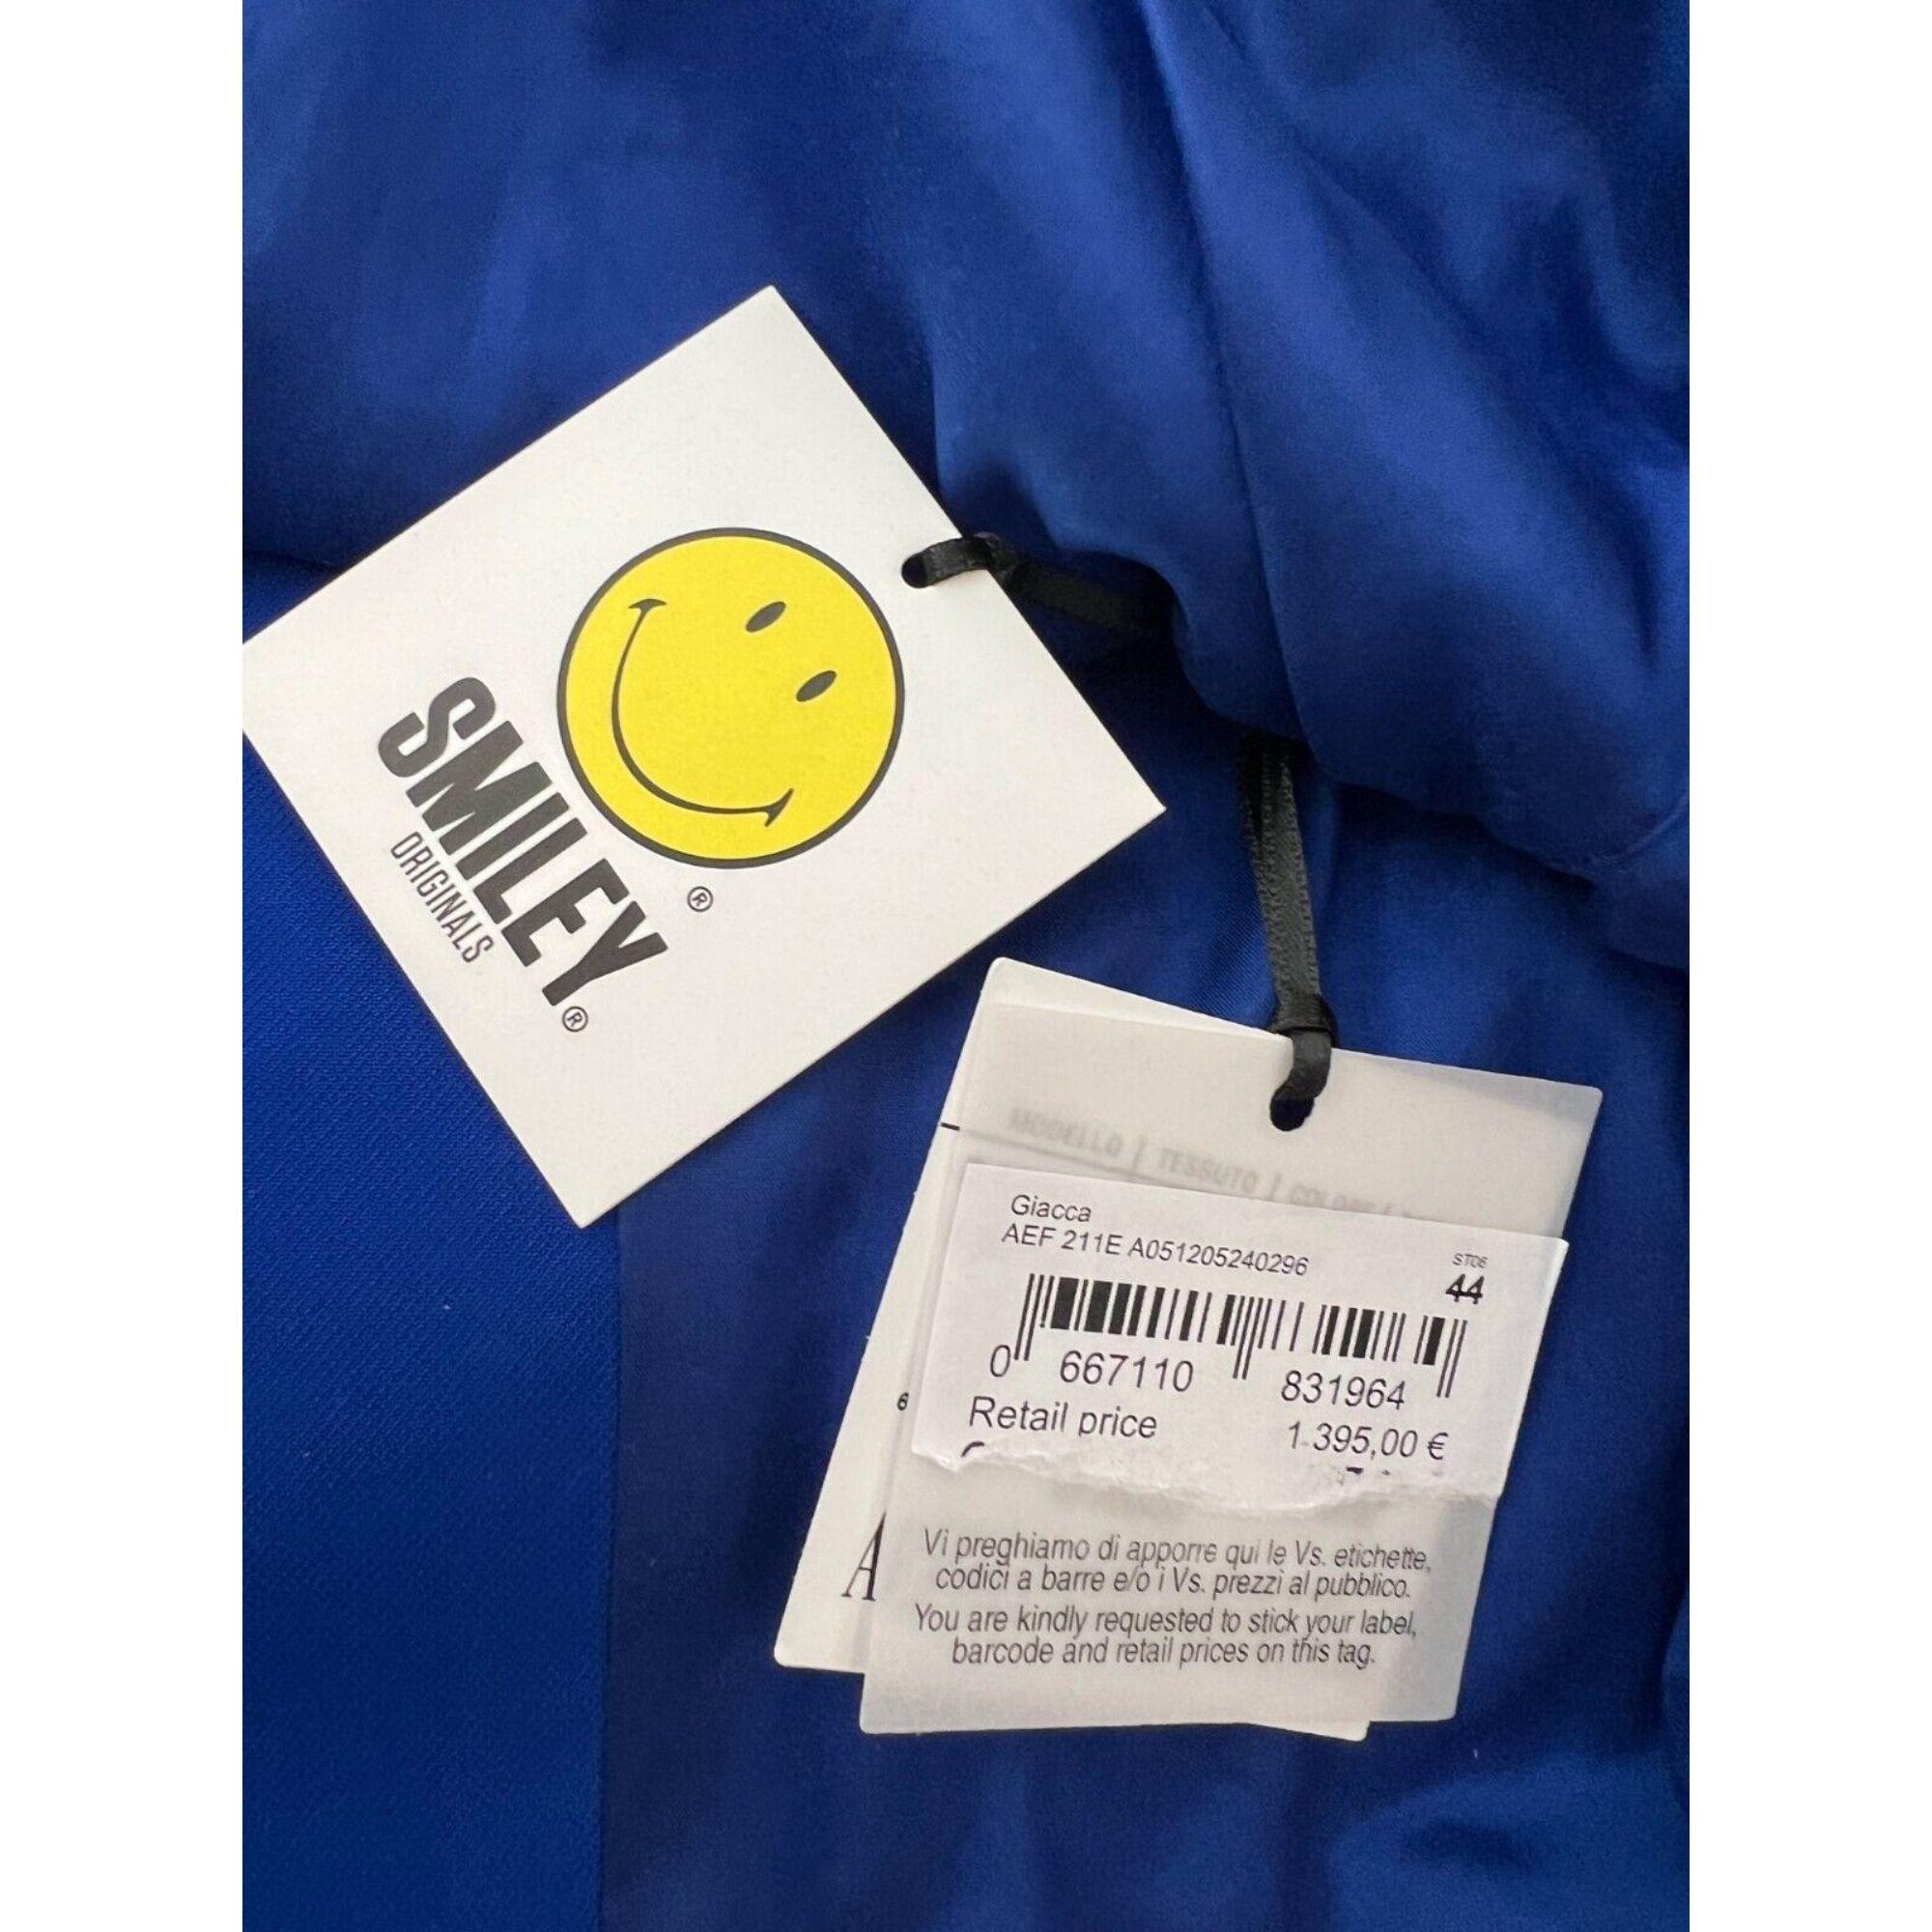 SS21 Moschino Couture BlueBlazer Smiley Face by Jeremy Scott, Size US 10 For Sale 6